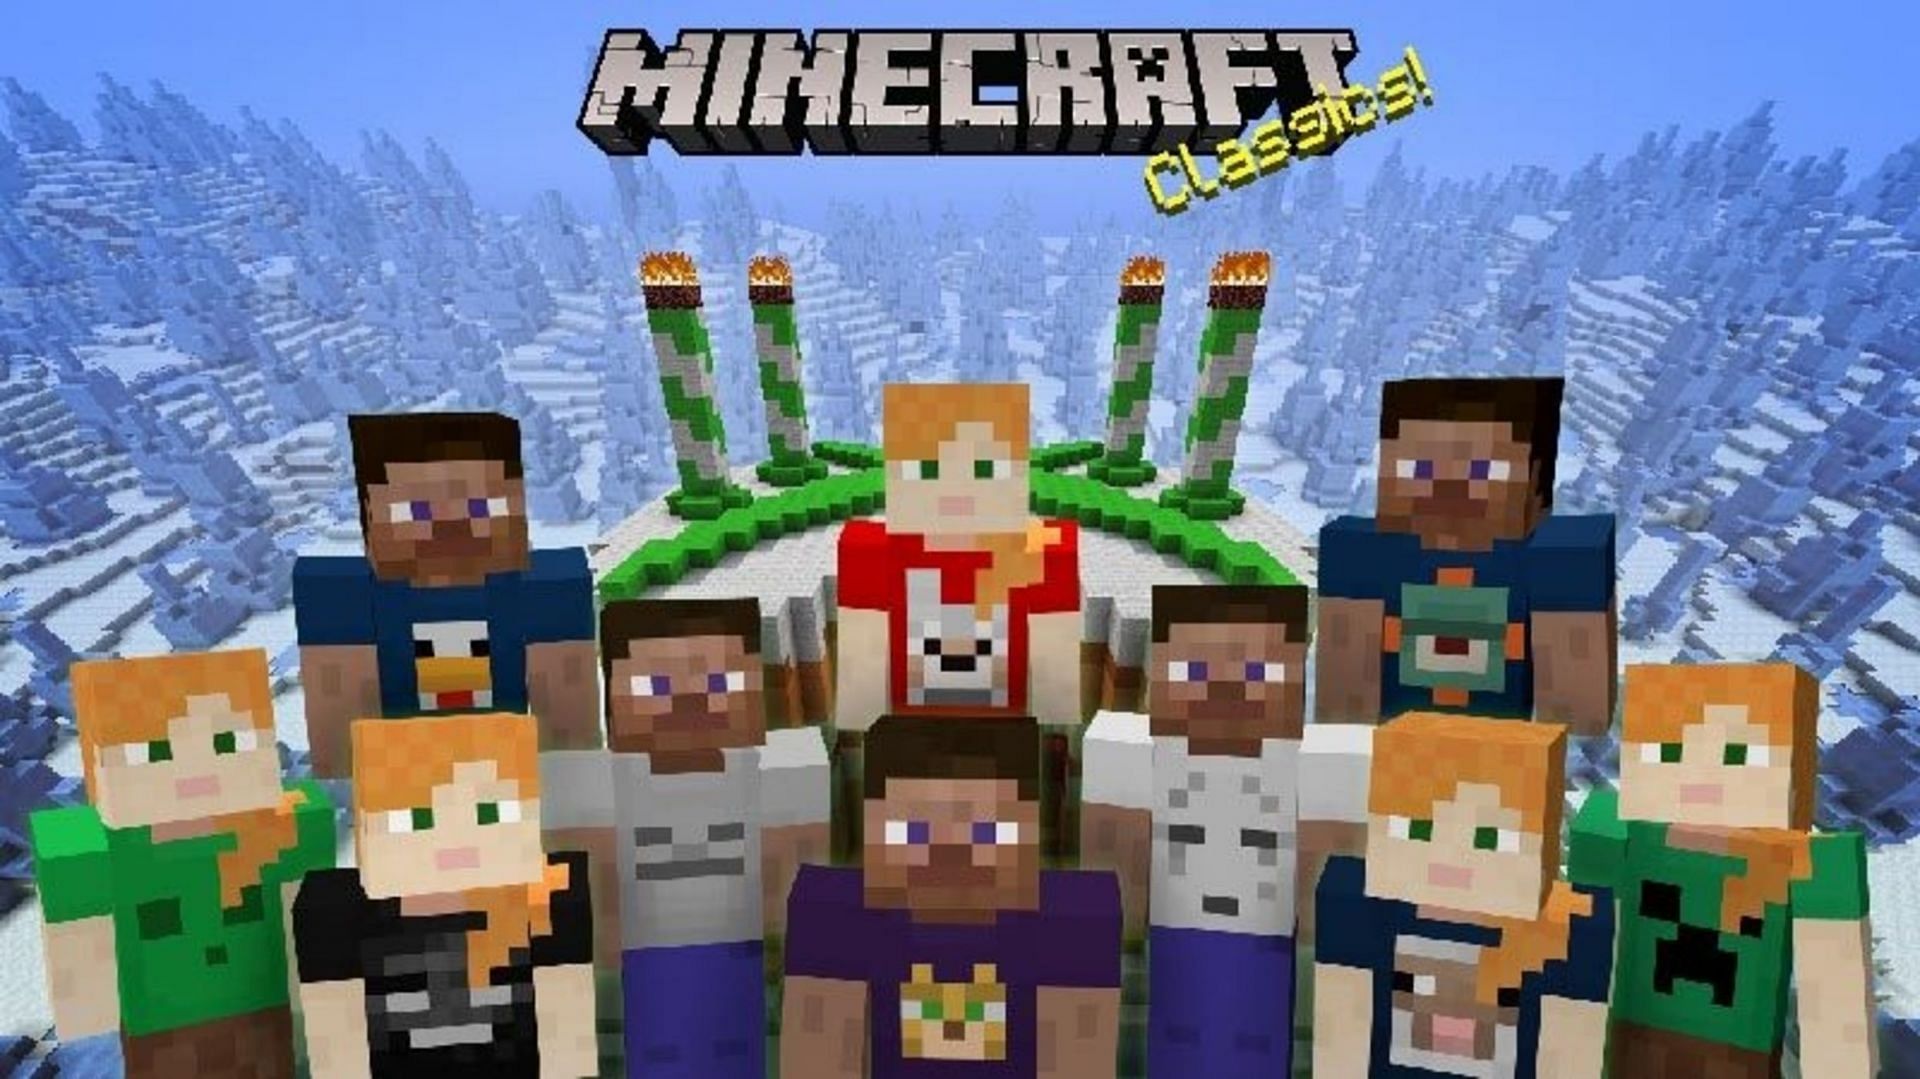 Skin packs make for an excellent means of customization for Minecraft players (Image via Mojang)